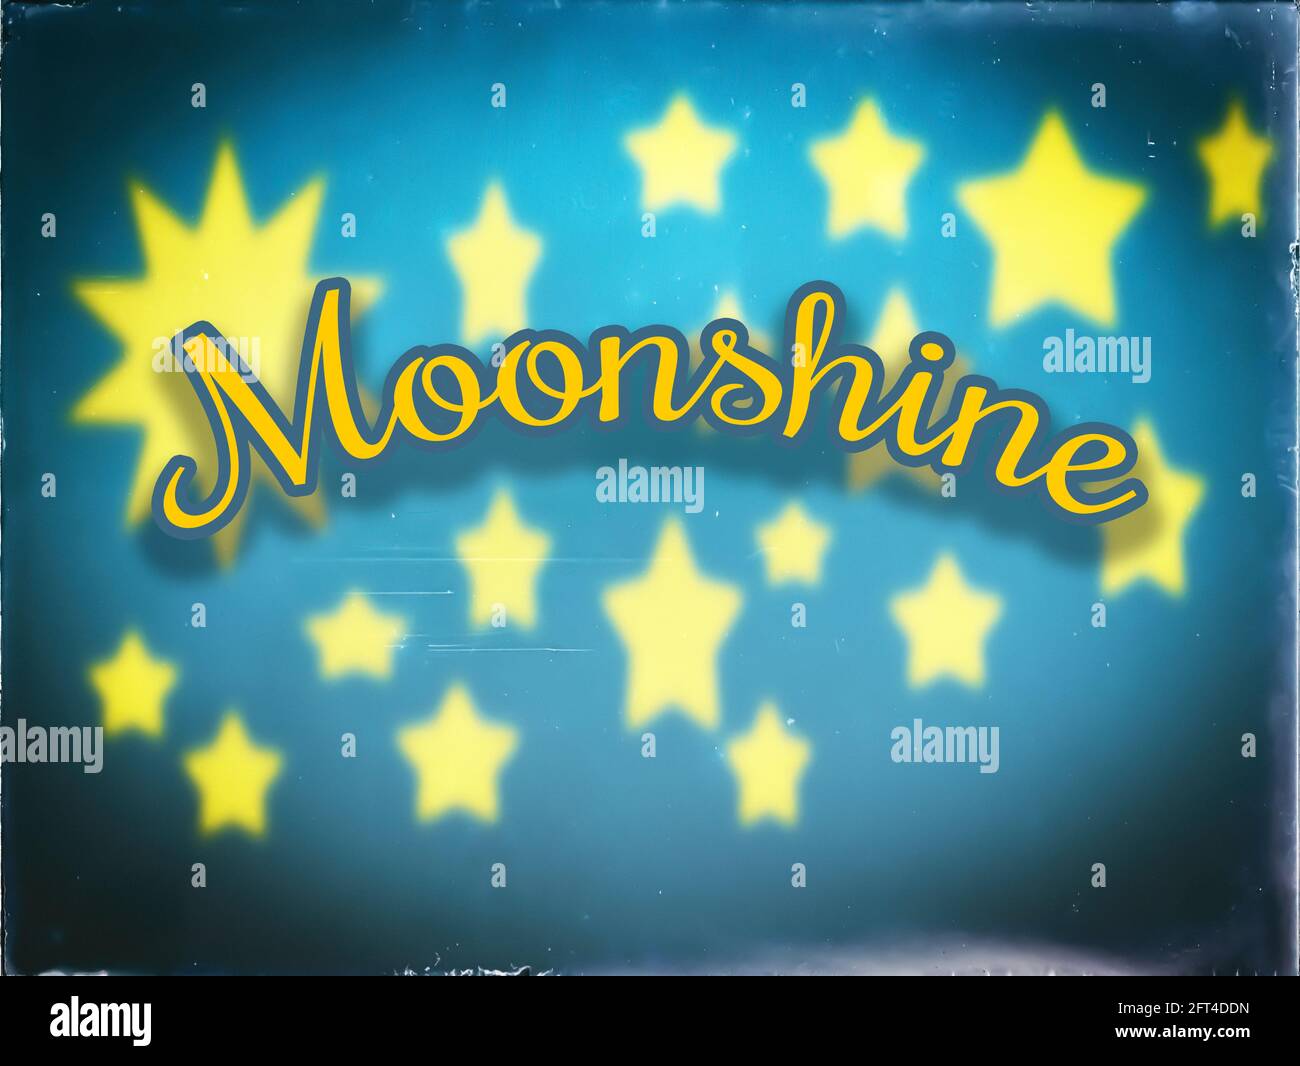 Moonshine displayed on a blue vintage background with golden stars and cursive font Stock Photo